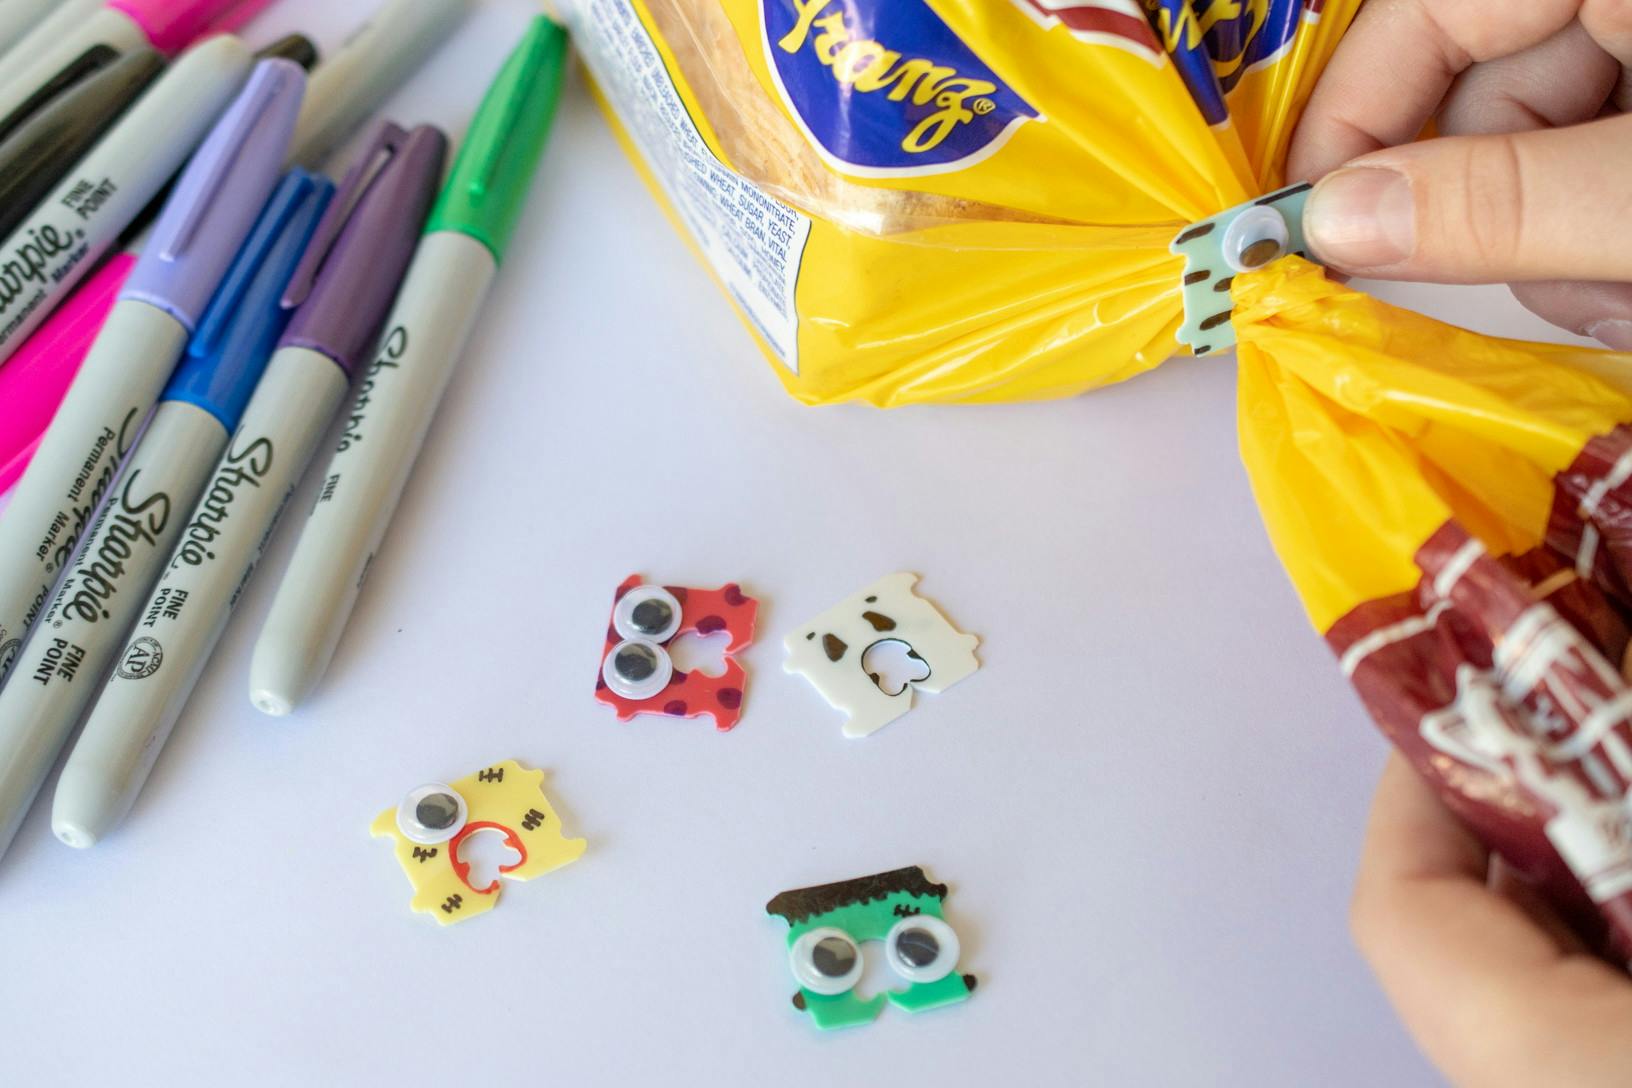 Bread clips decorated like Halloween monsters next to varying colors of sharpie pens and a person attaching one bread clip to a loaf of bread